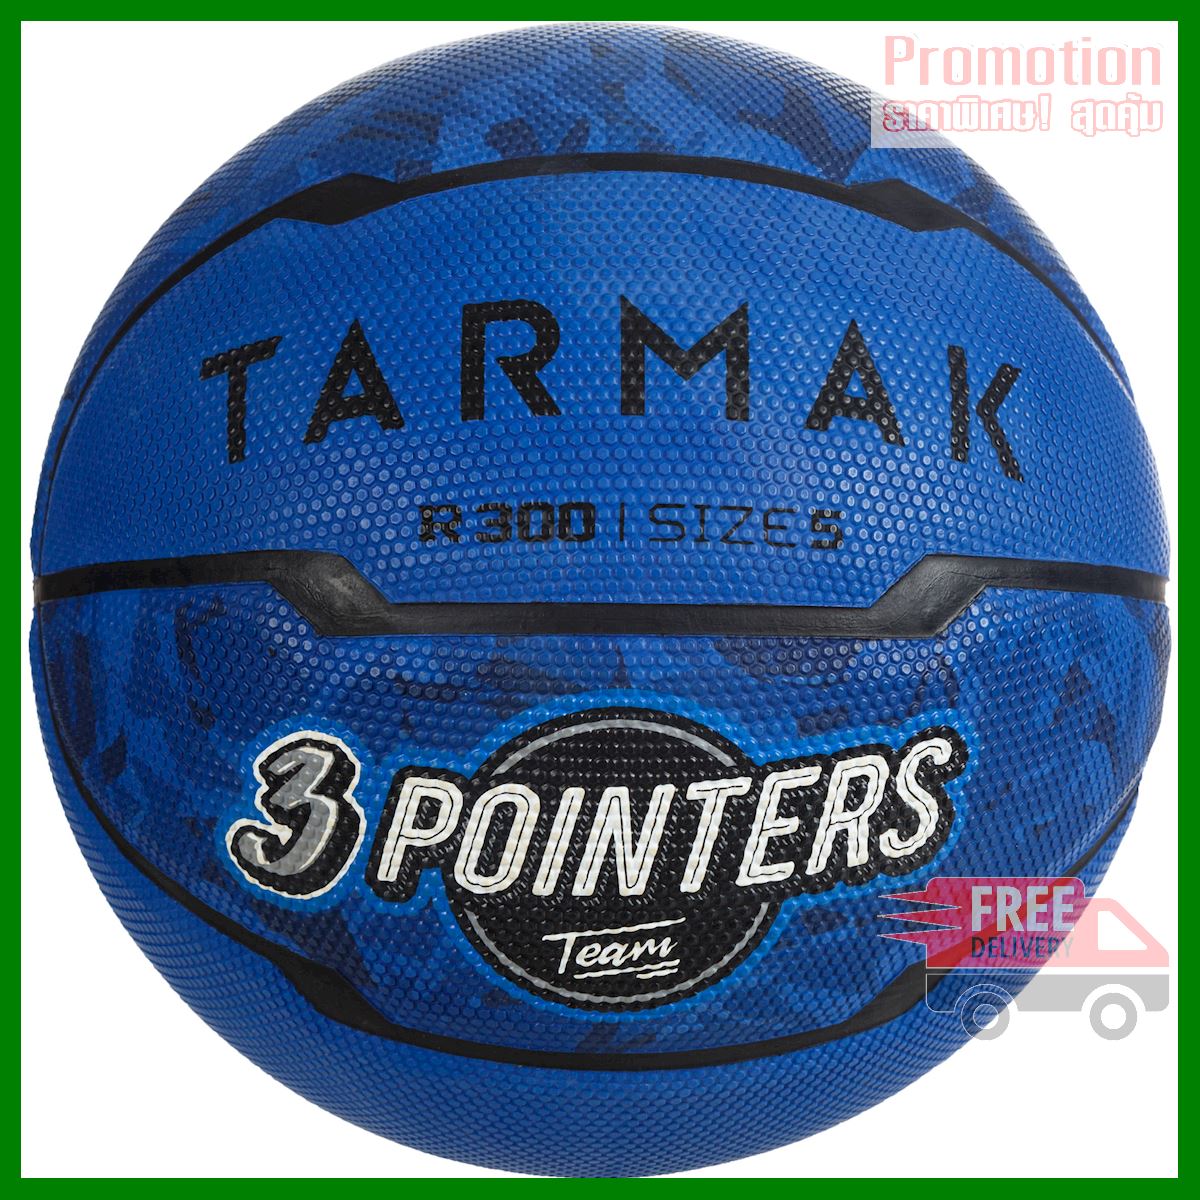 R300 Size 5 Beginner Basketball for Kids up to 10 years old - Blue